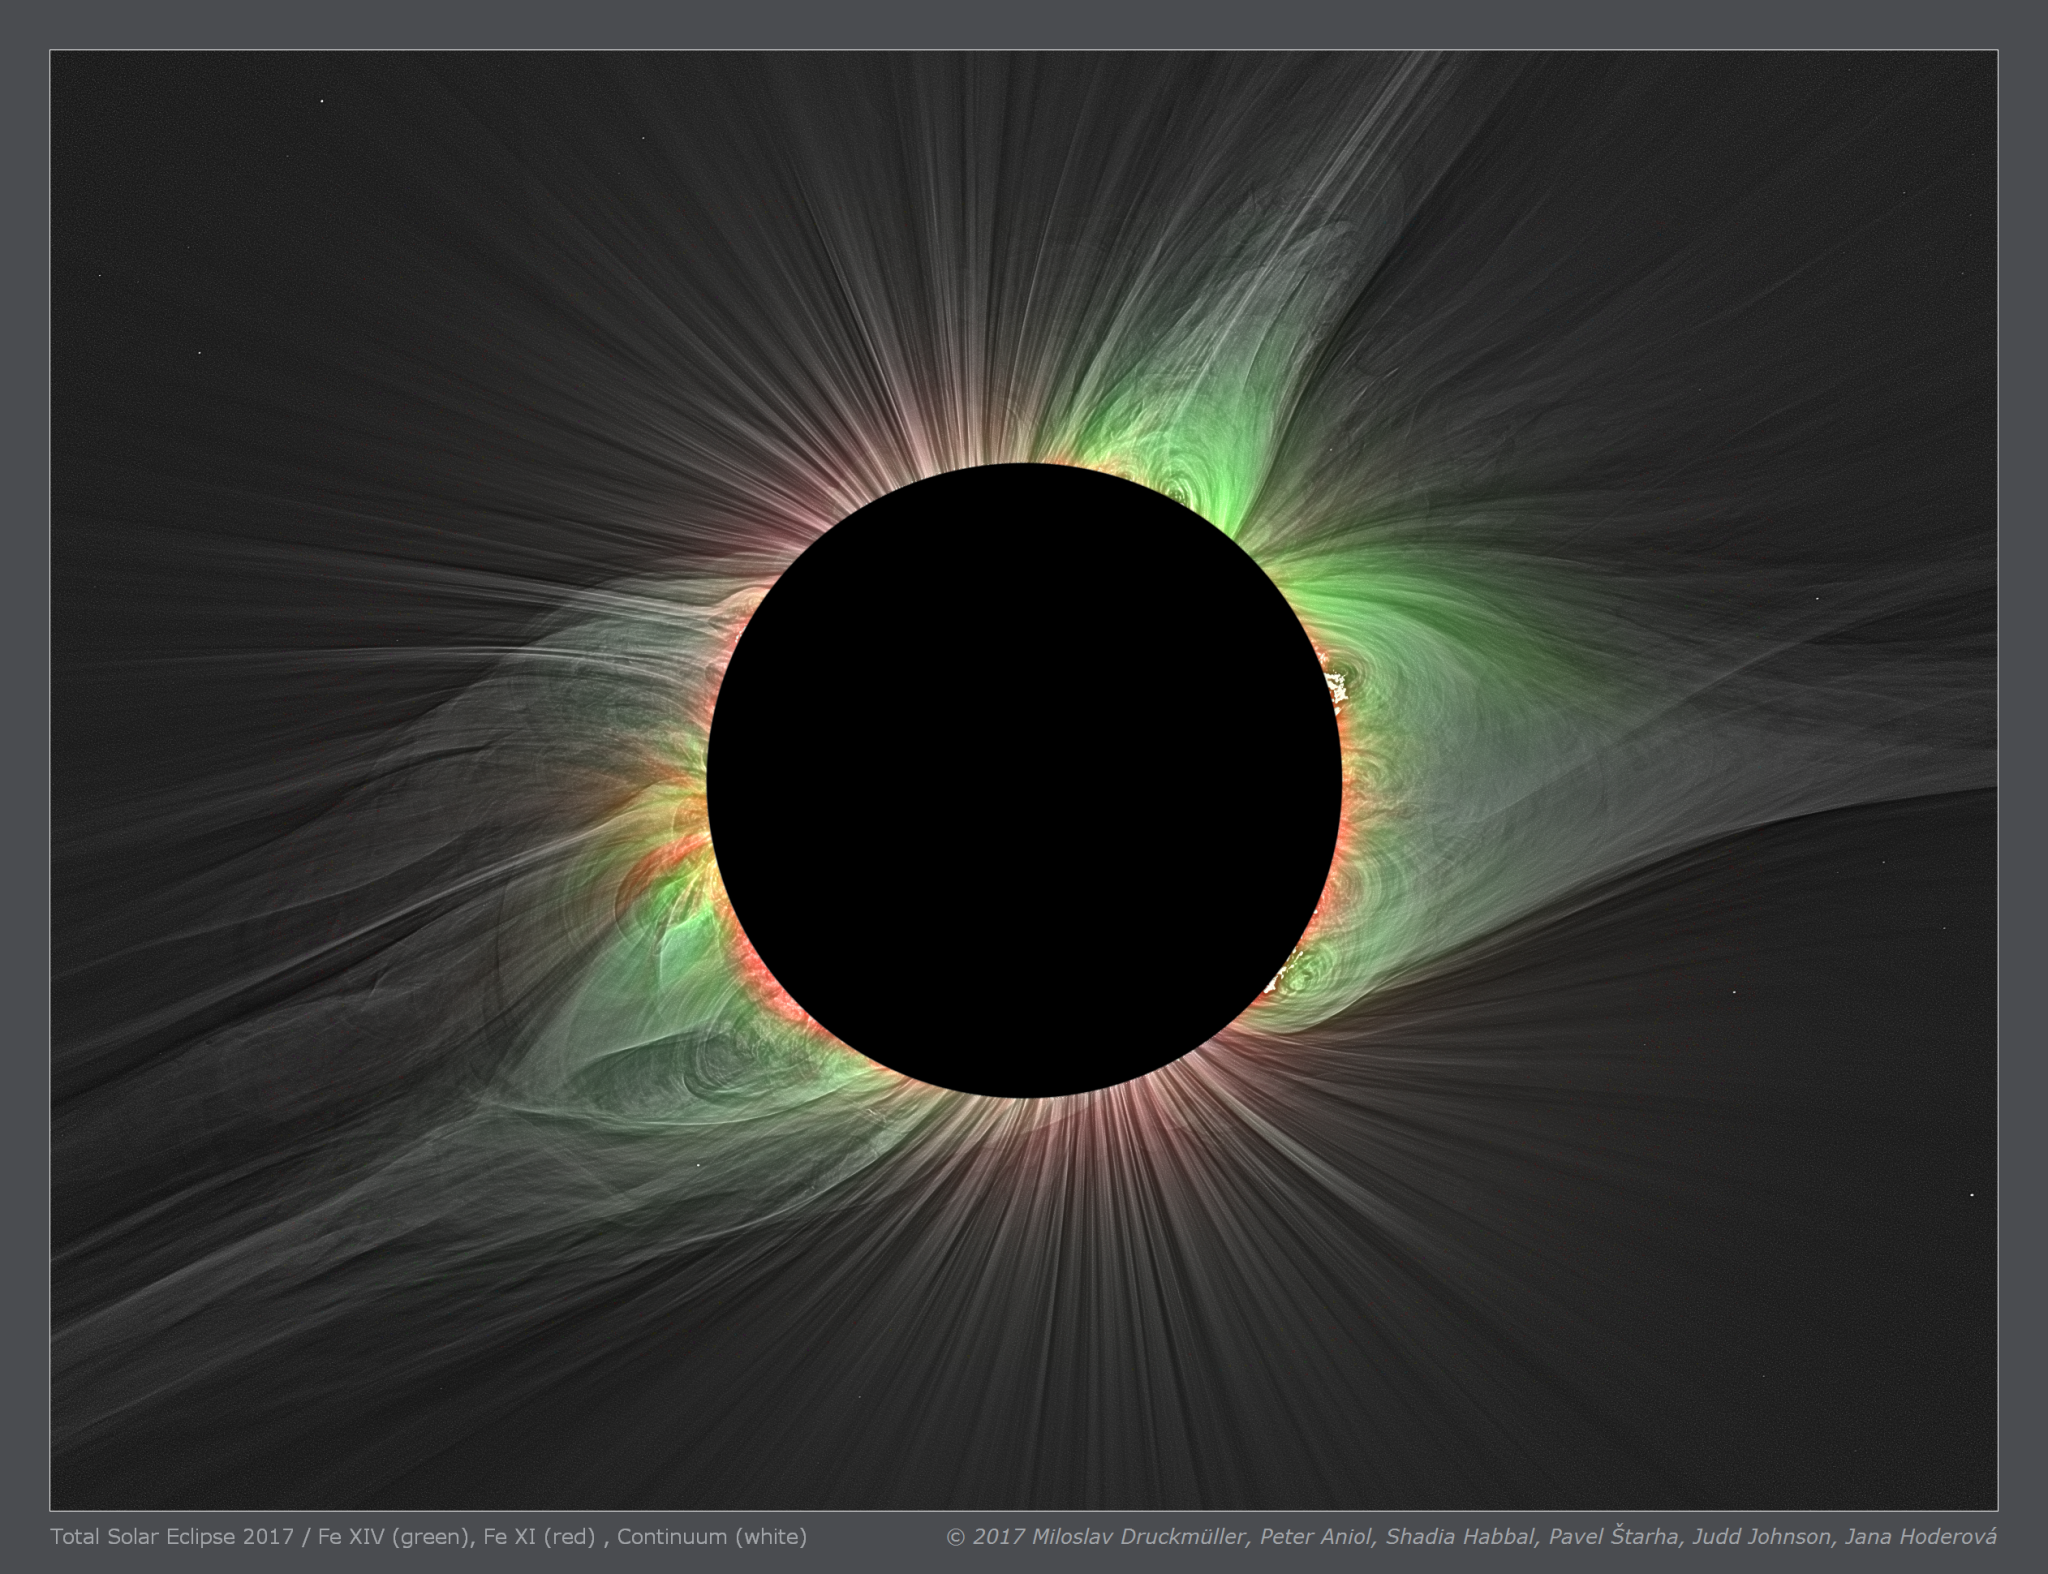 An eclipse image shows the Sun's face covered by the Moon, revealing the corona. The area above the Sun's north and south poles are streaked with red. On either side, the petal-shaped streamers of the corona are mostly green, with some red close to the solar surface. 